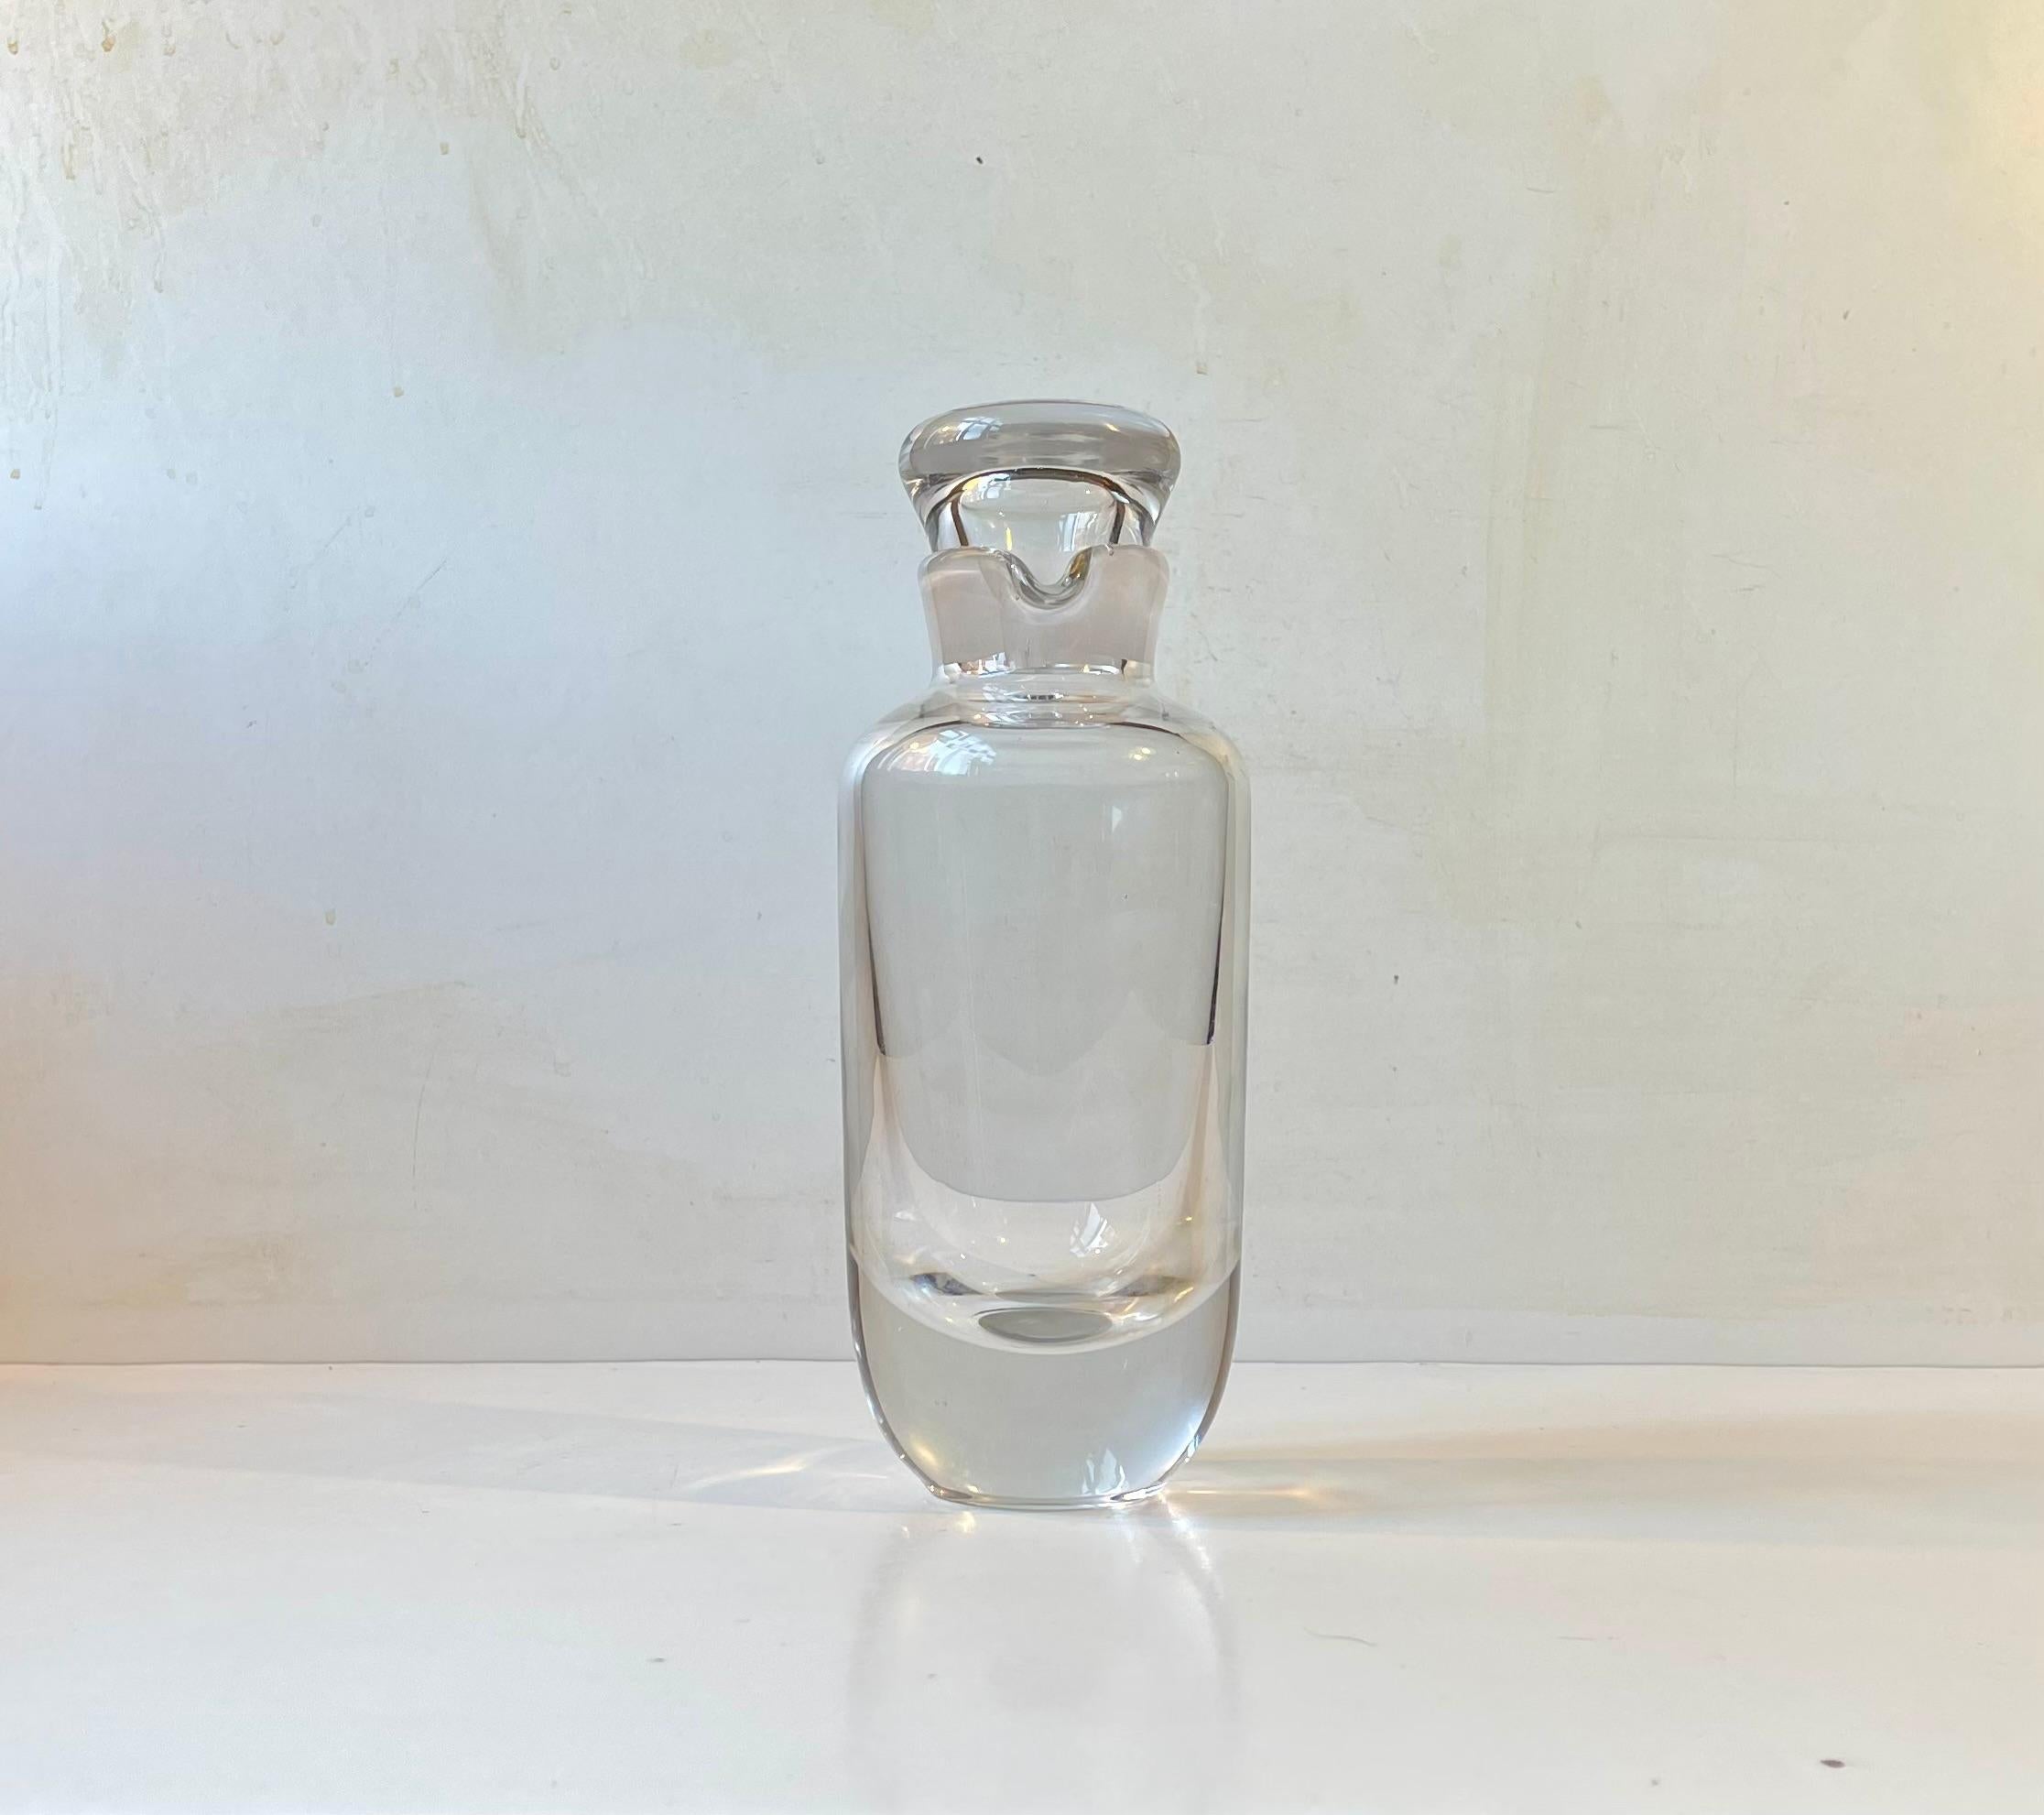 Stylish decanter/cocktail shaker in thick clear crystal glass. Probably made during the 1970s by Orrefors in Sweden after a design by Vicke Lindstrand. Signed indistinguishable to its base. Very wellkept and clean vintage condition. Measurements: H: